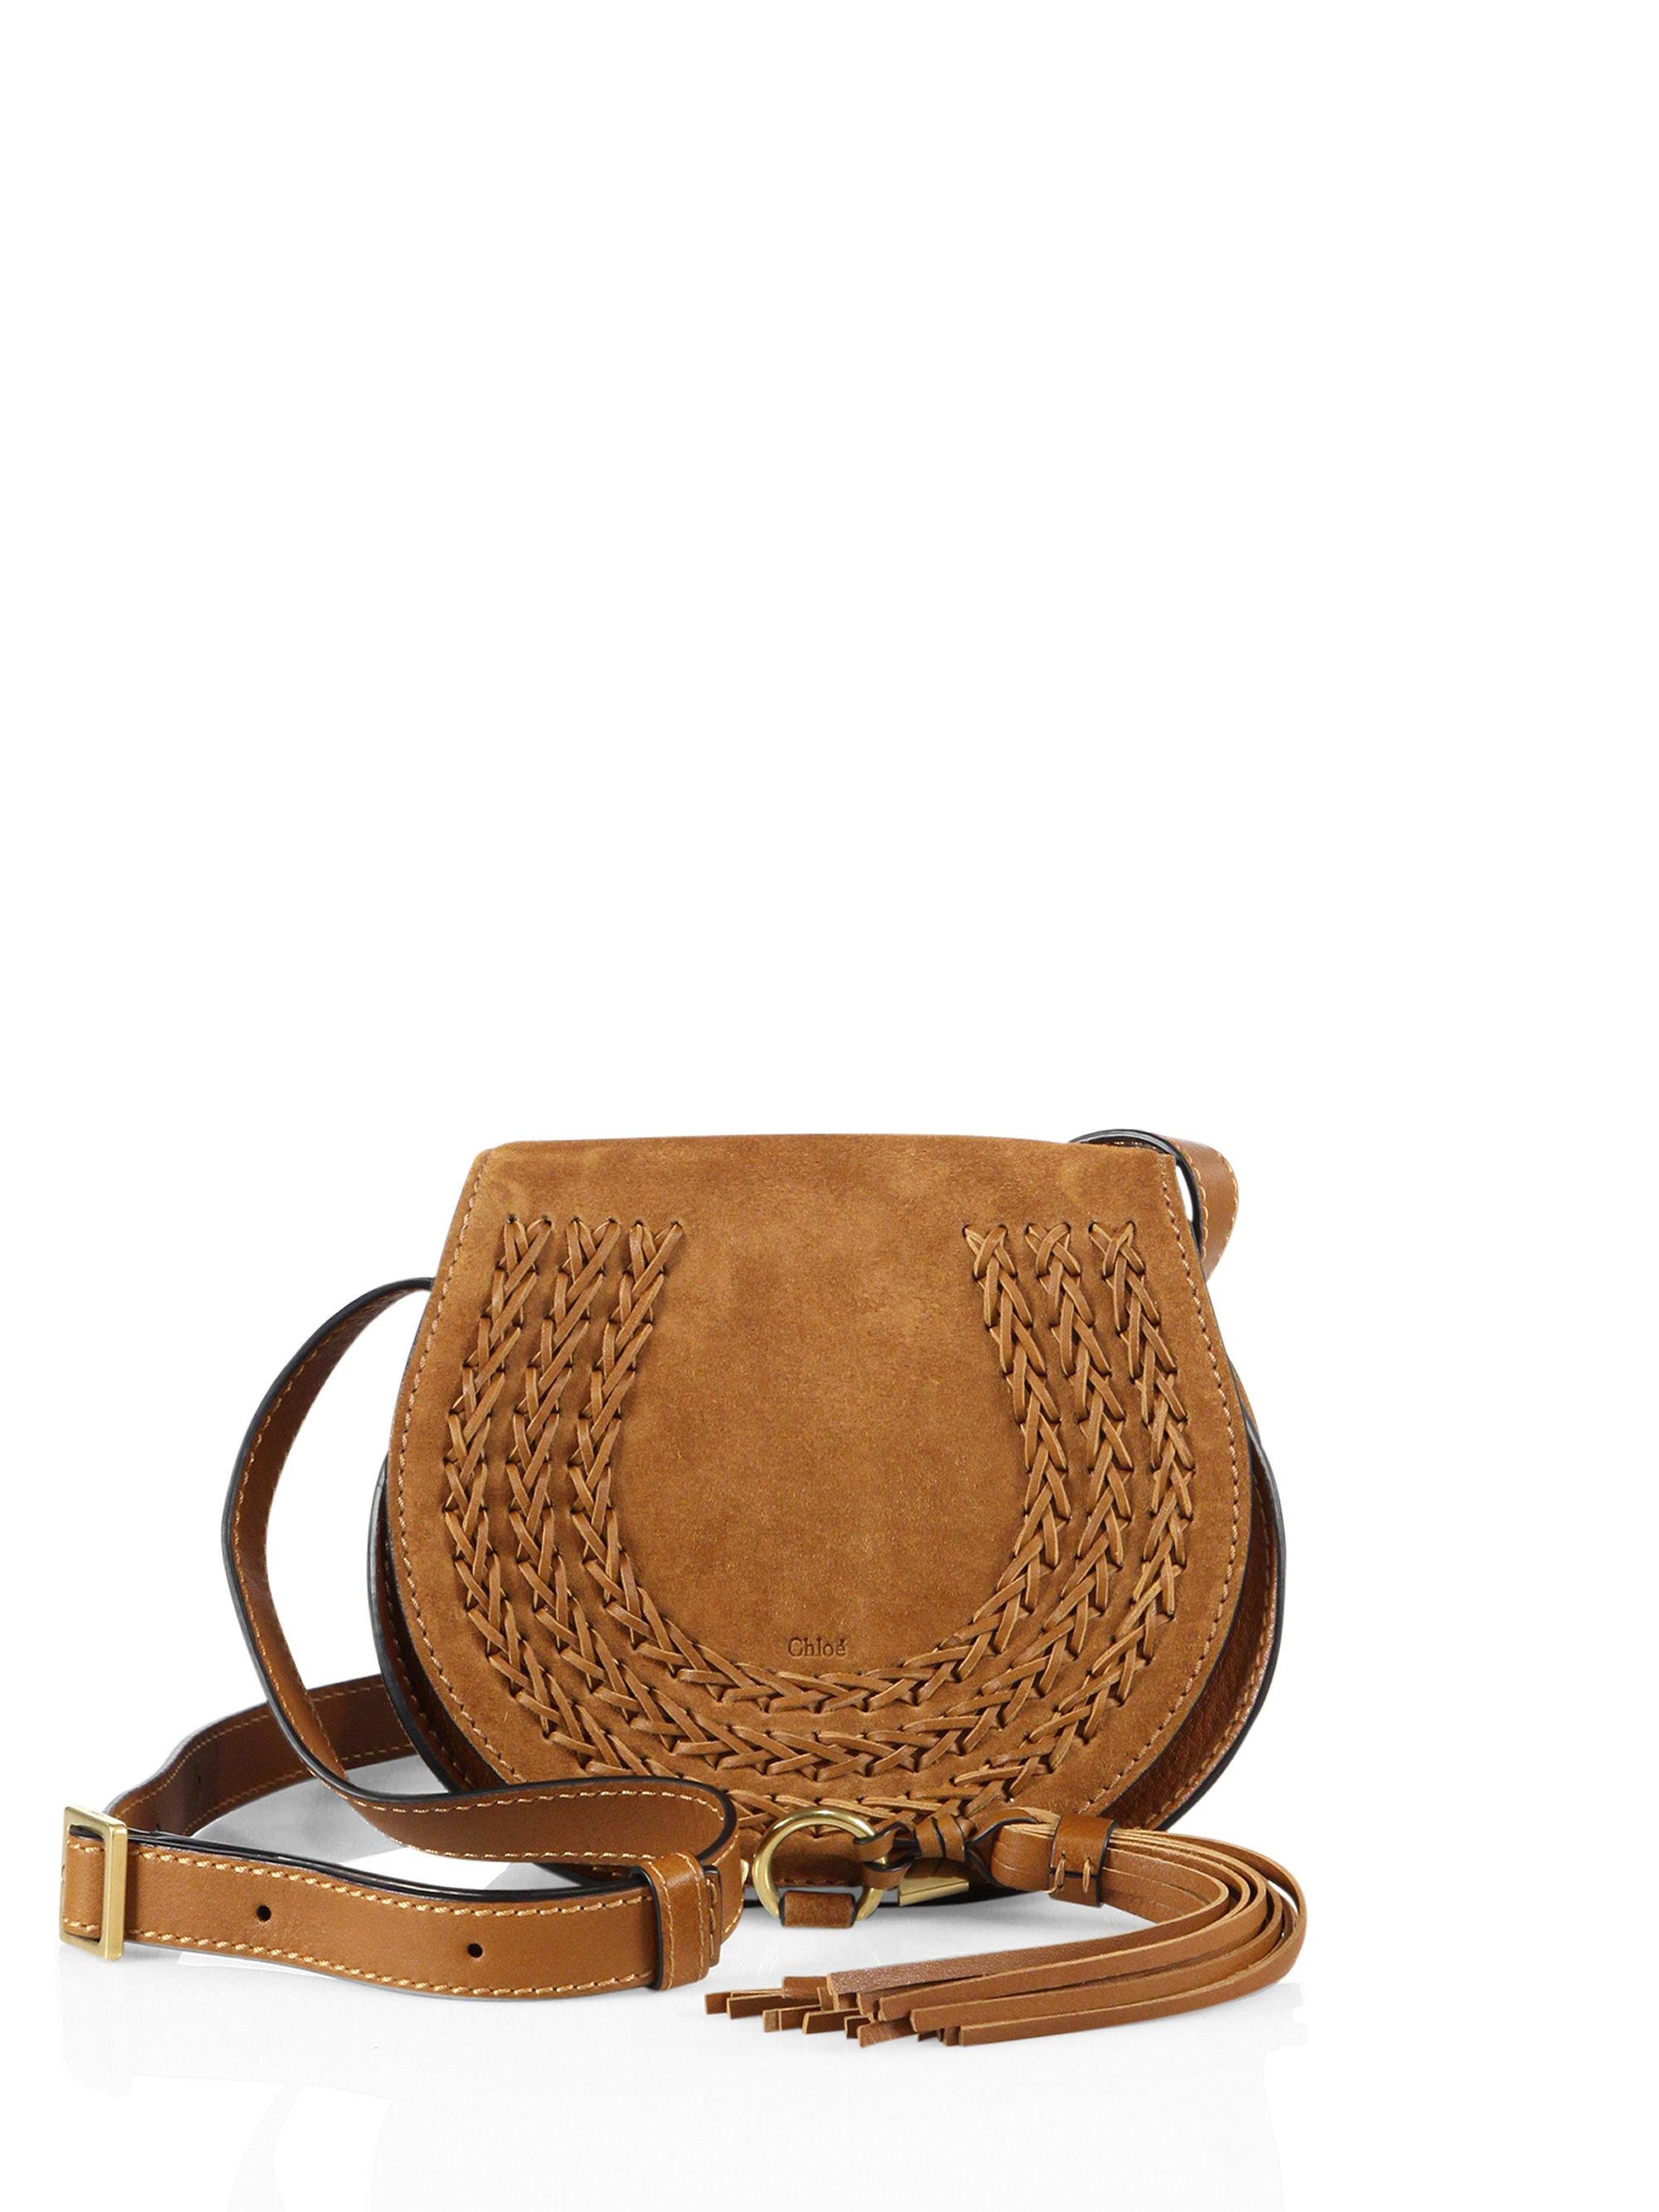 Chloé Marcie Small Suede Saddle Crossbody Bag In Brown Lyst